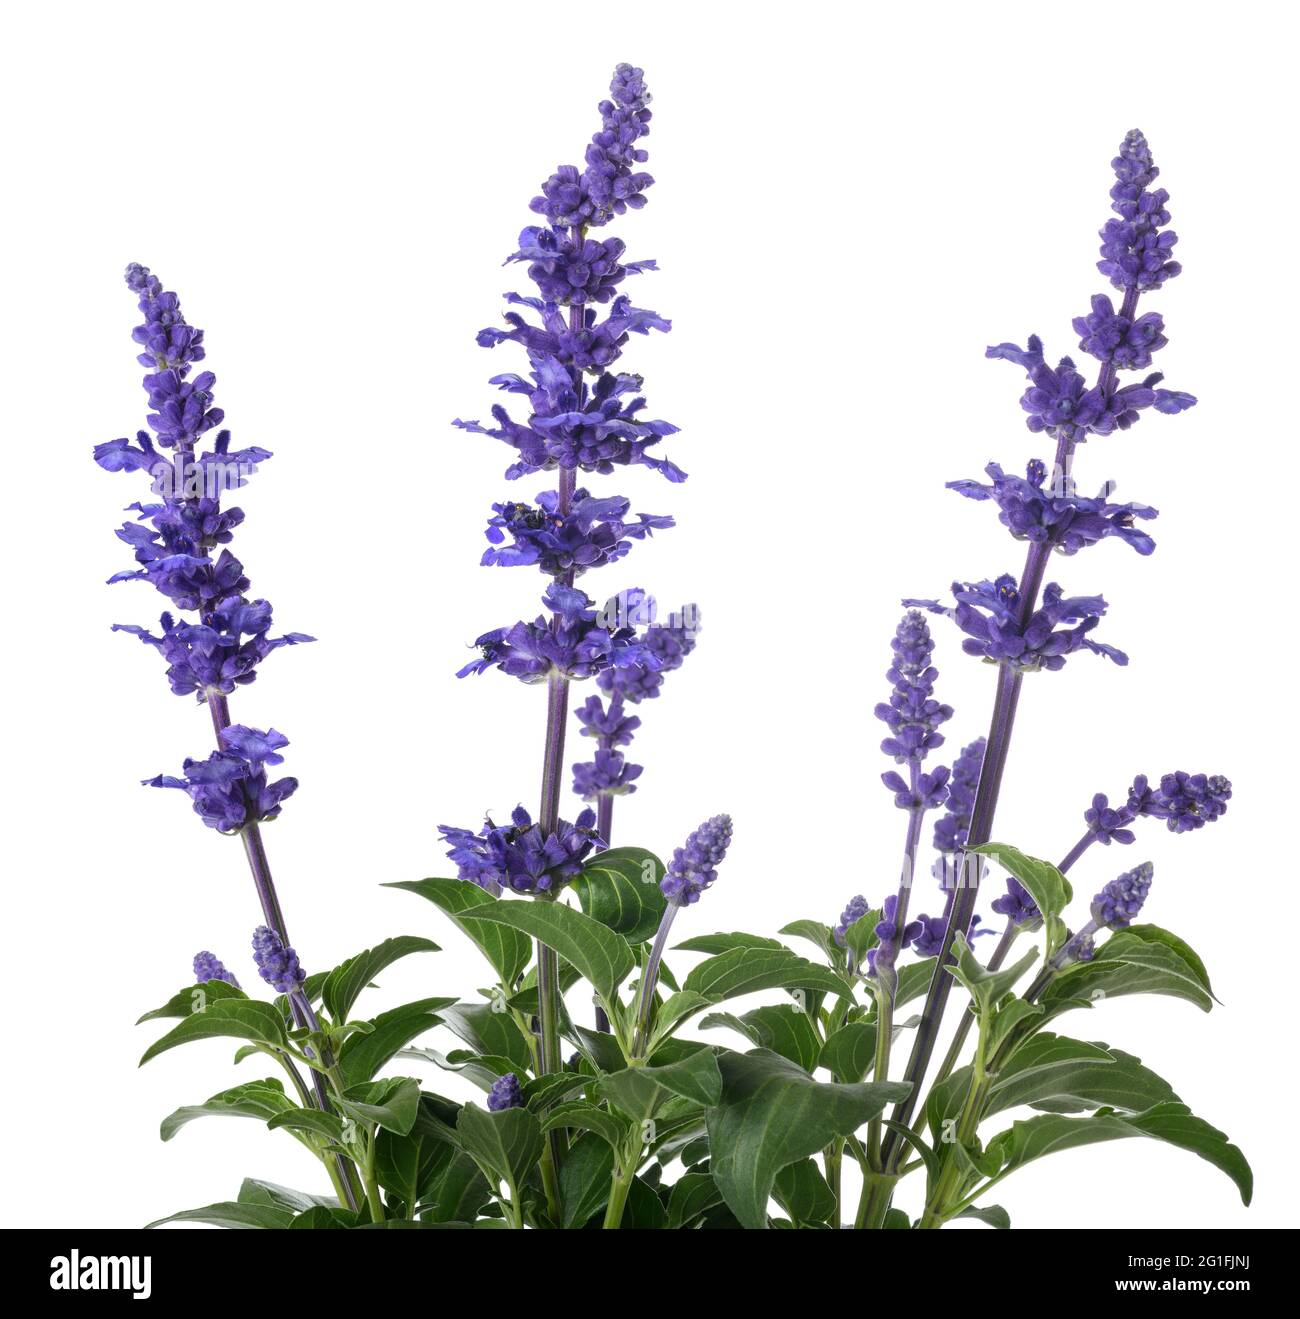 Salvia farinacea with flowers isolated on white background Stock Photo